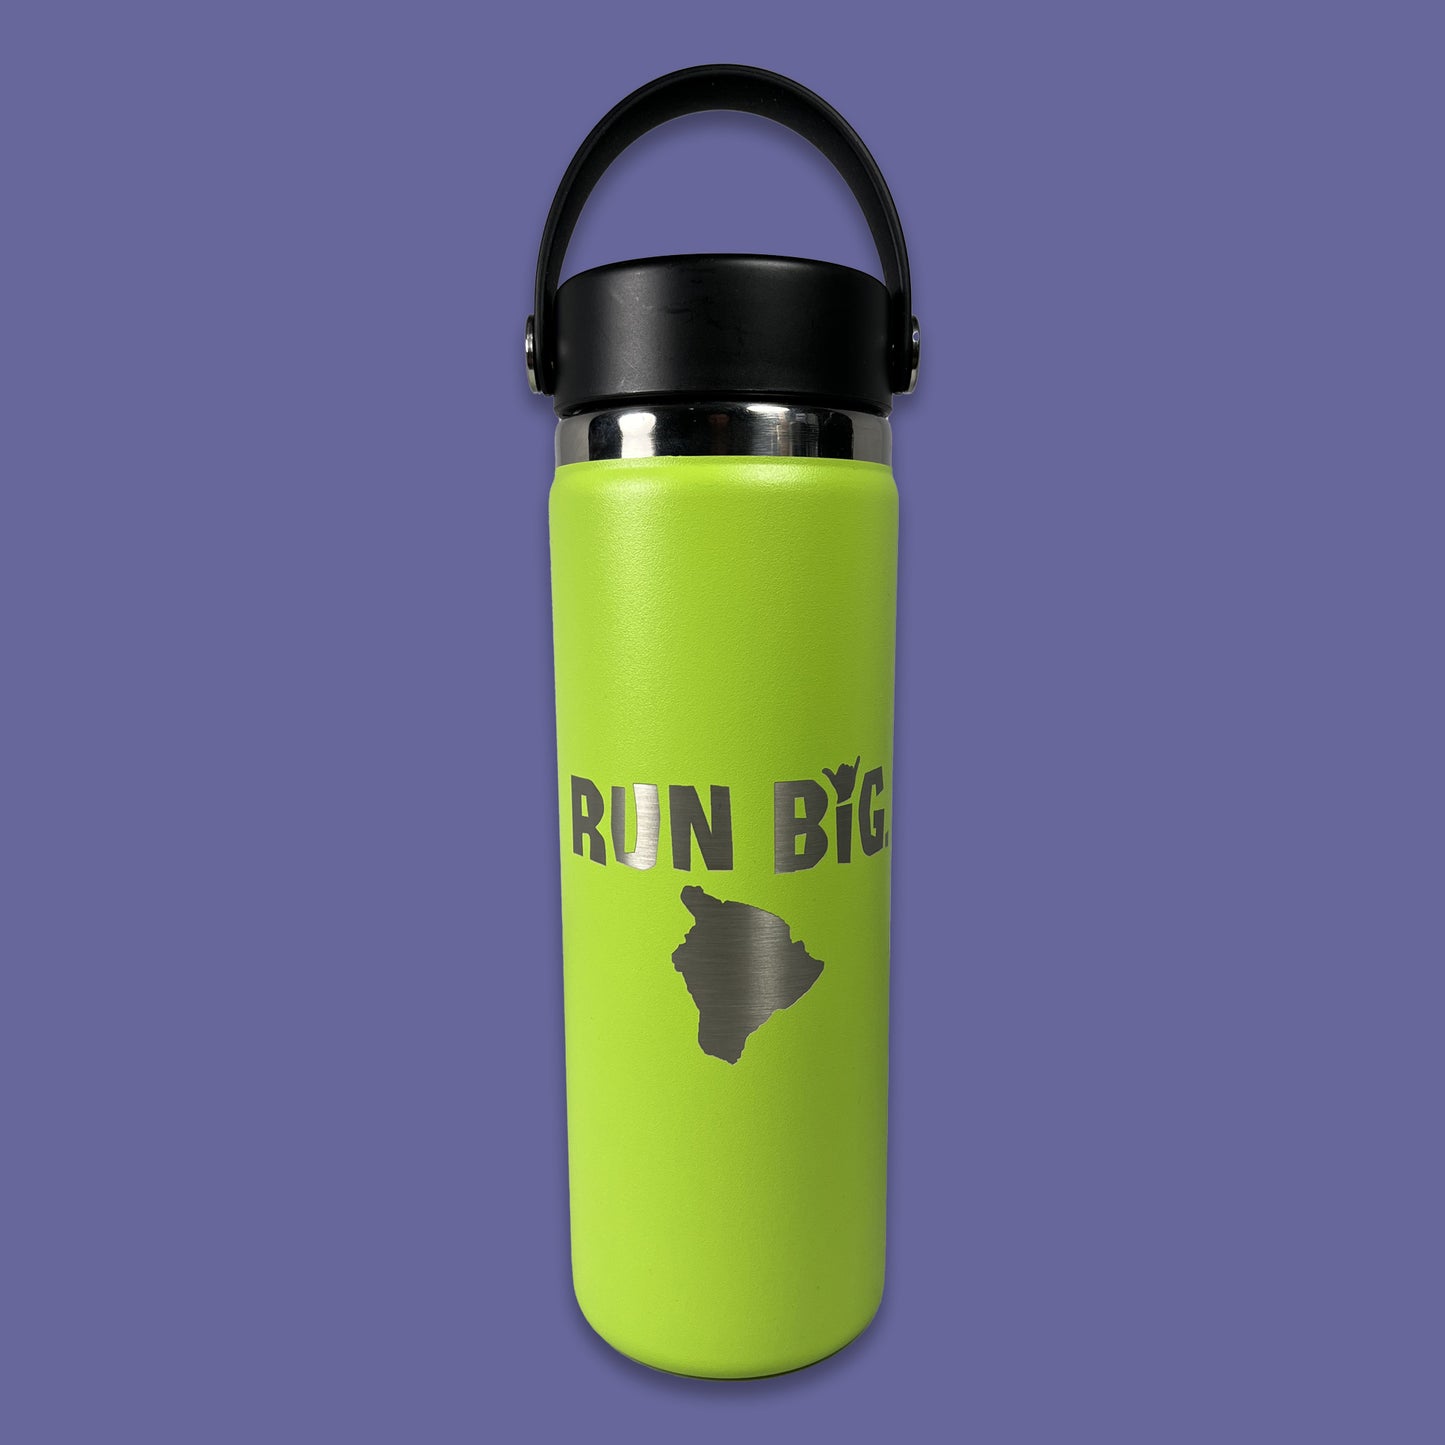 HydroFlask - 20 oz. Wide Mouth with Flex Lid